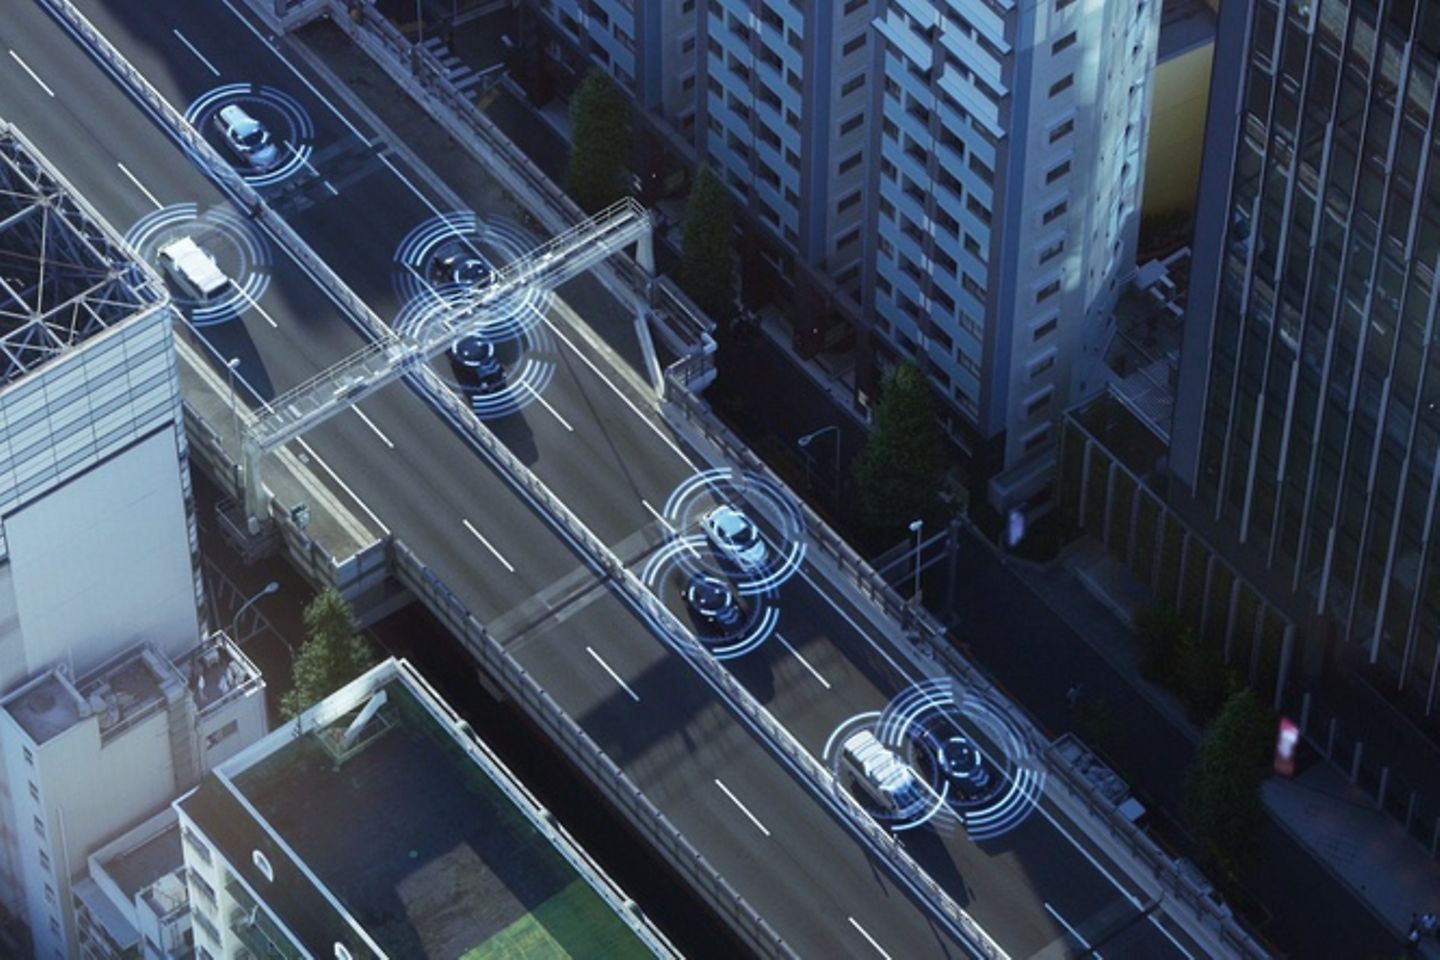 Bird’s-eye view of a road in a city on which cars are travelling, surrounded by network icons.